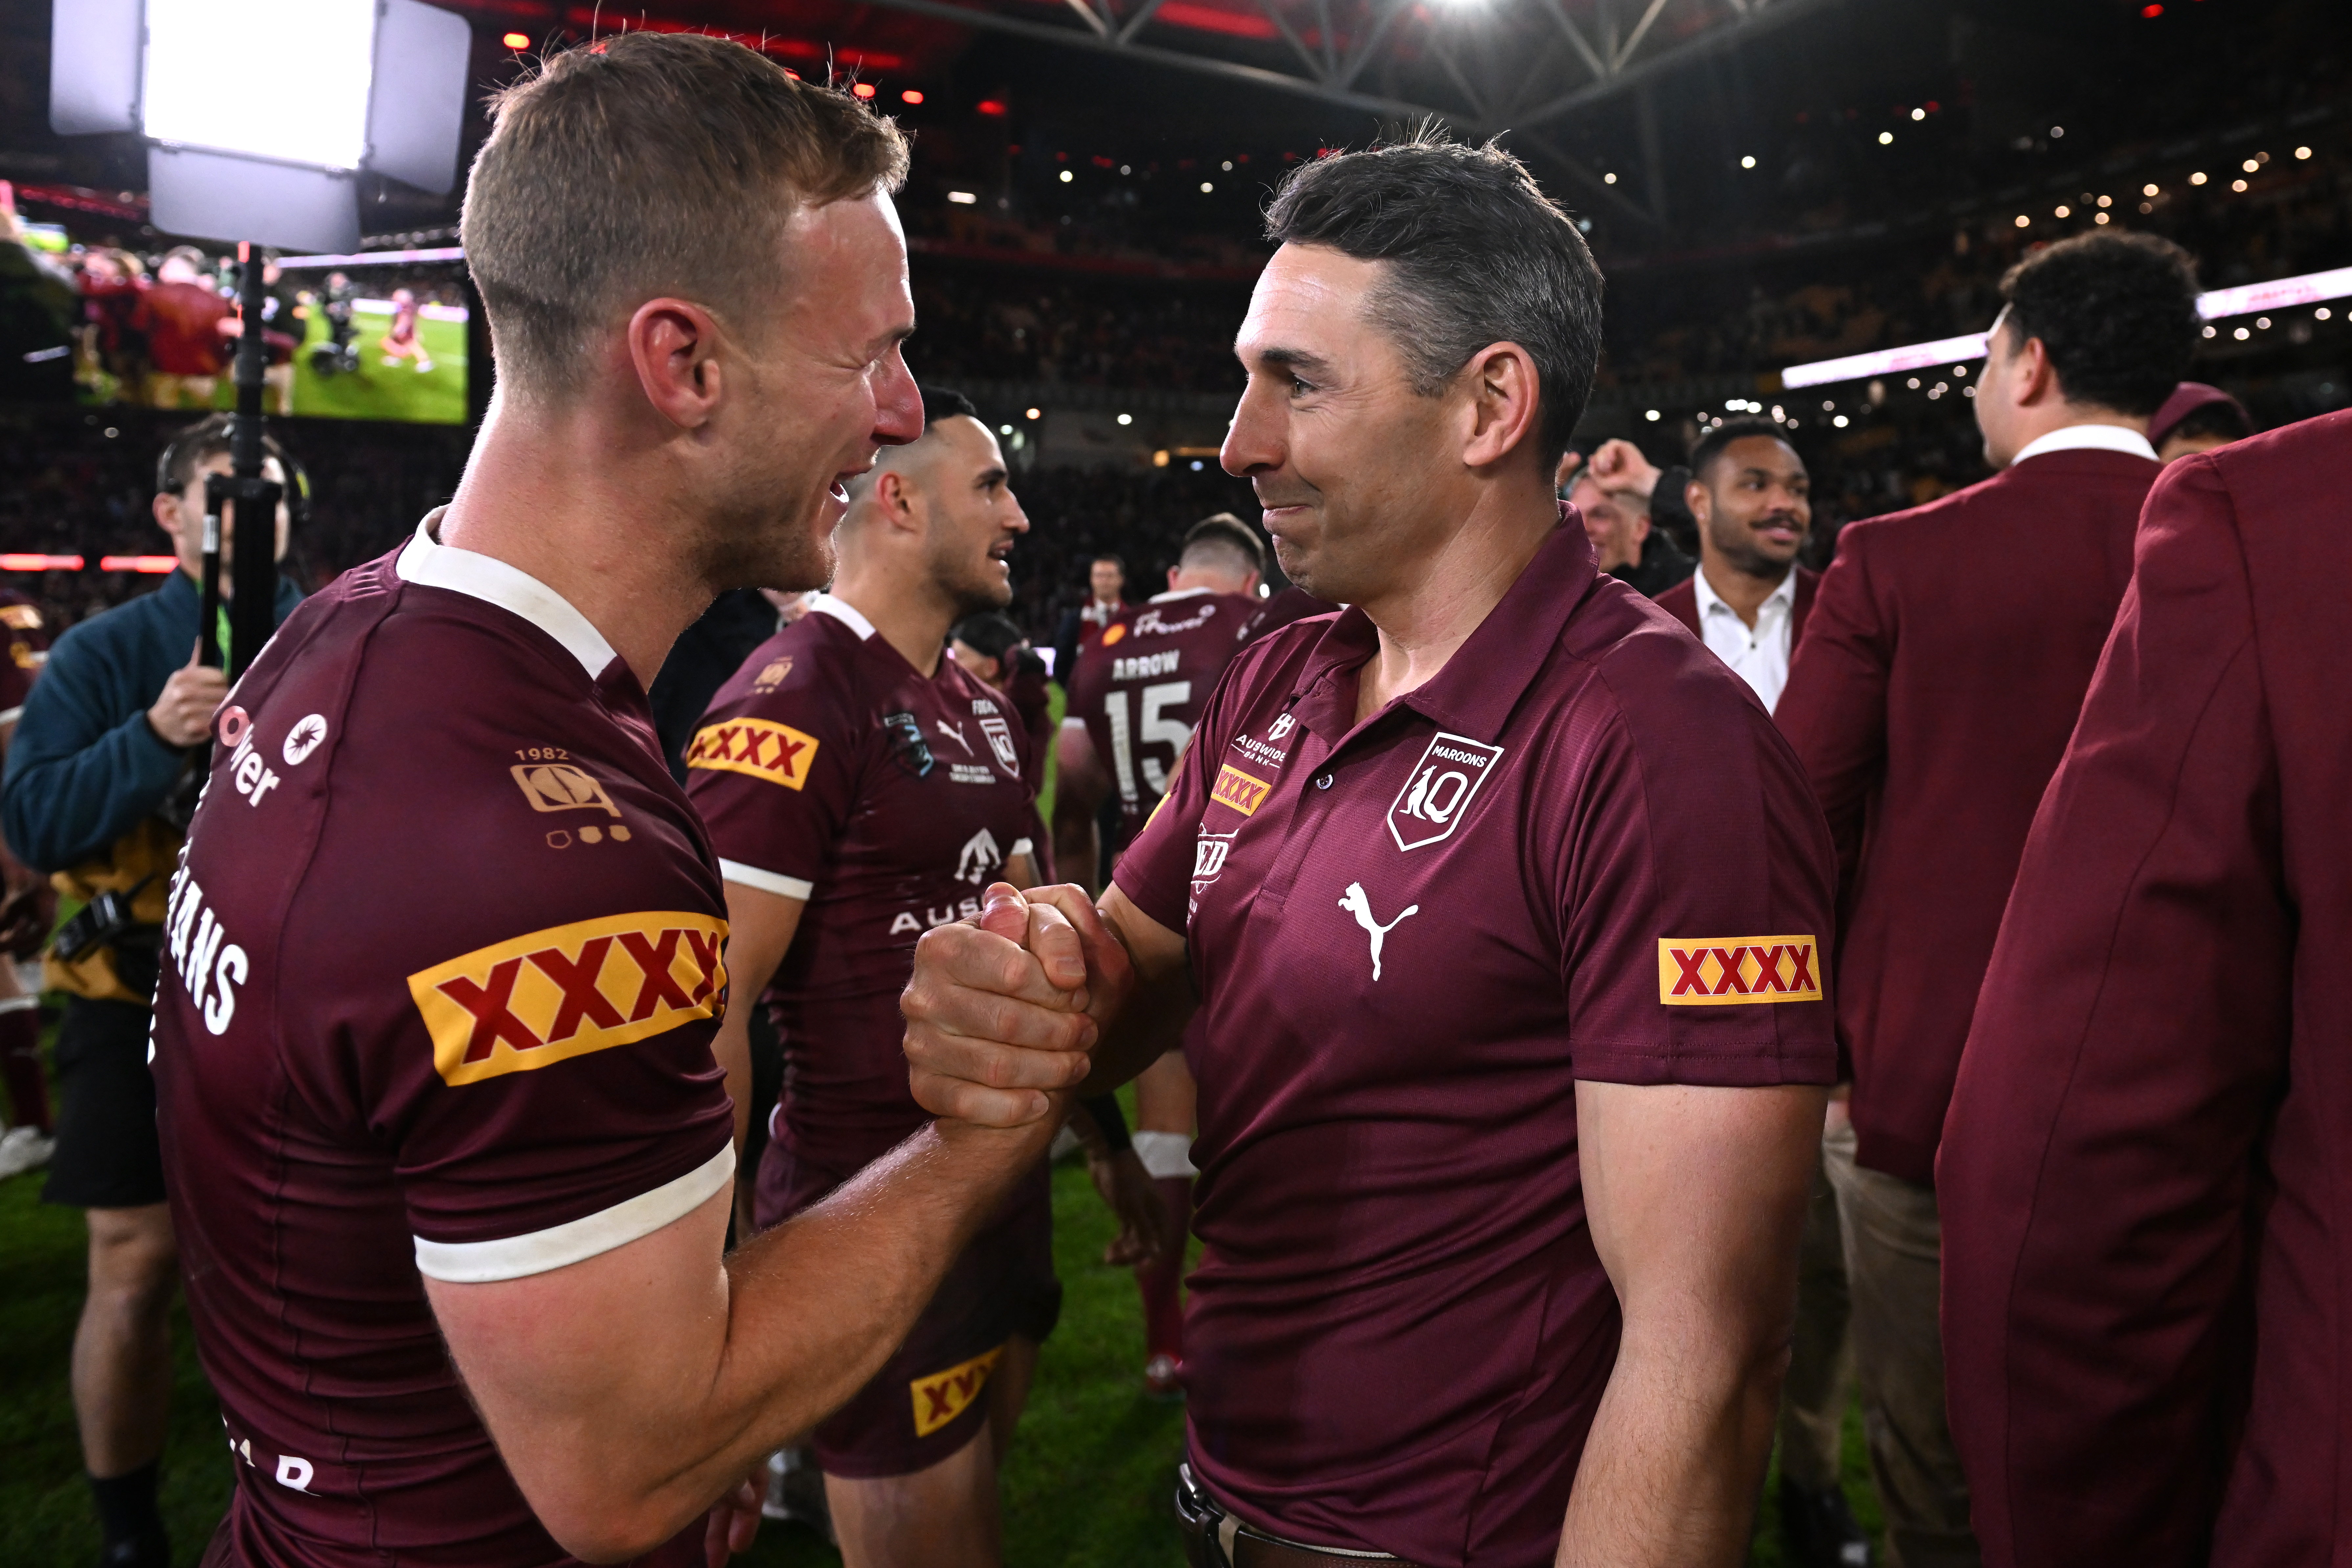 Maroons head coach Billy Slater embraces captain Daly Cherry-Evans after securing the Origin series 2-1.